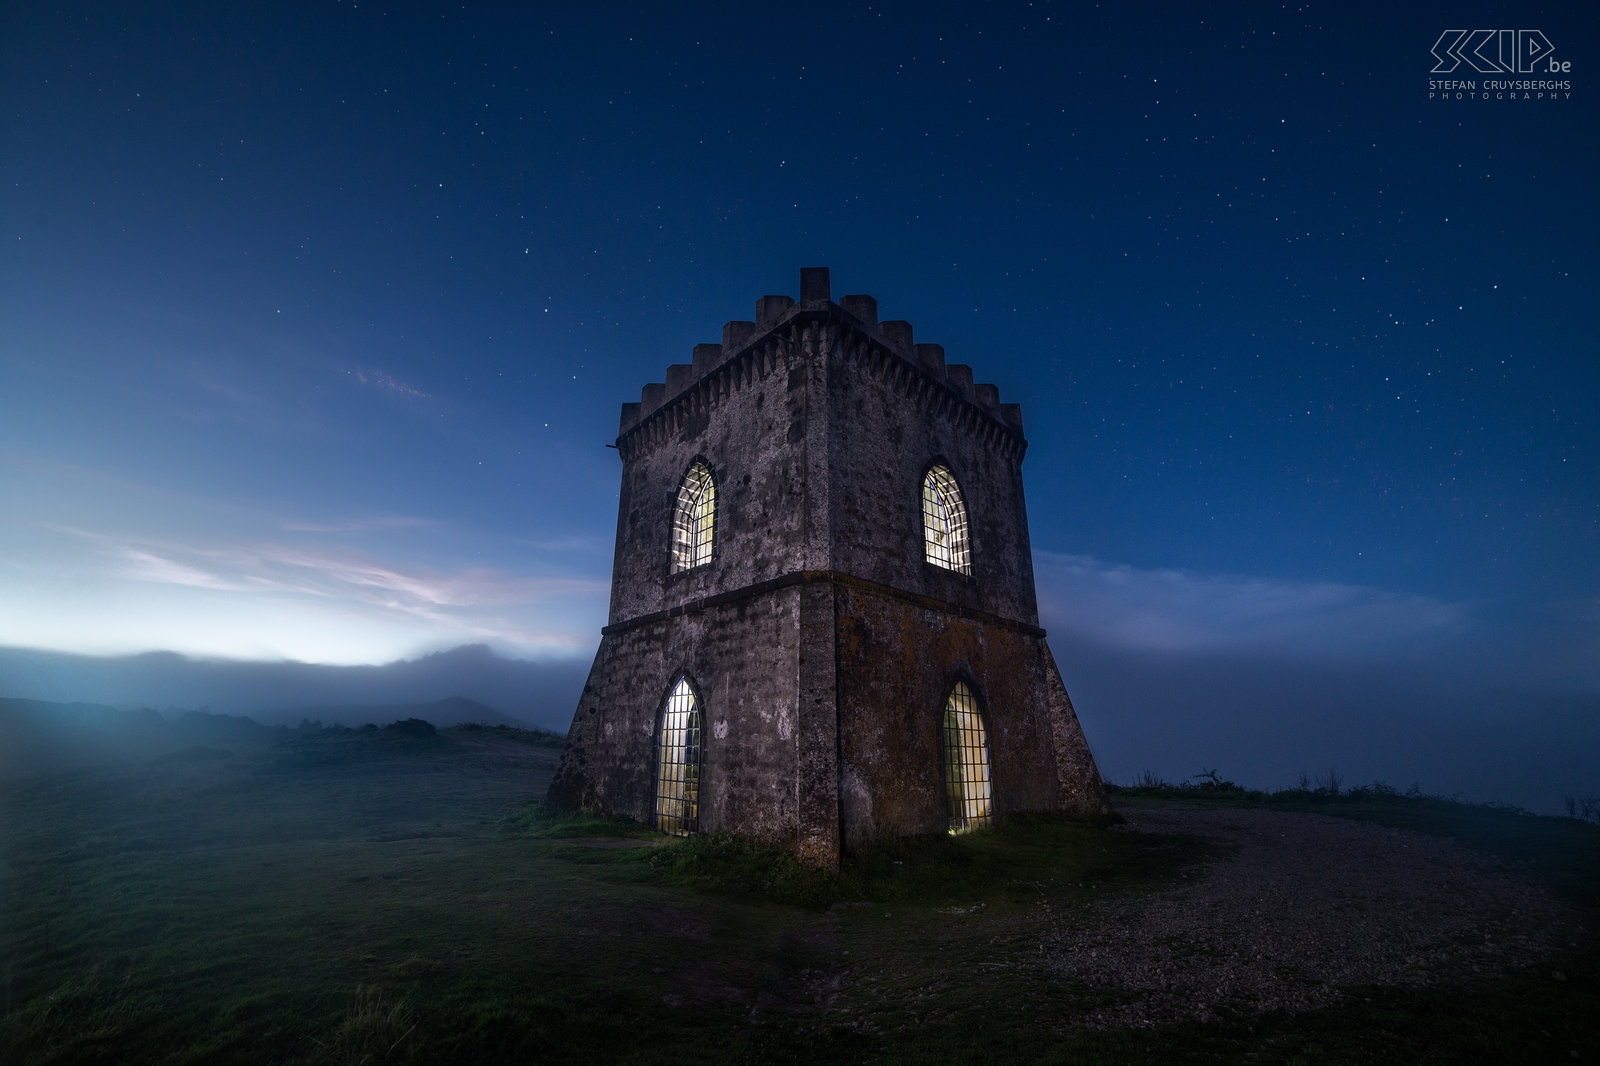 Castelo Branco by night The tower of the Castelo Branco at the end of the blue hour with some fog at the high hilltop. The Miradouro do Castelo Branco is a viewpoint at the main island São Miguel of the Azores. From there you can see the village of Villa Franca do Compo, the Furnas Lake and the Atlantic Ocean. The tower looks like a medieval fortress but it is more recent and constructed with concrete. I used some flash lights to illuminate  the insides of the tower. Stefan Cruysberghs